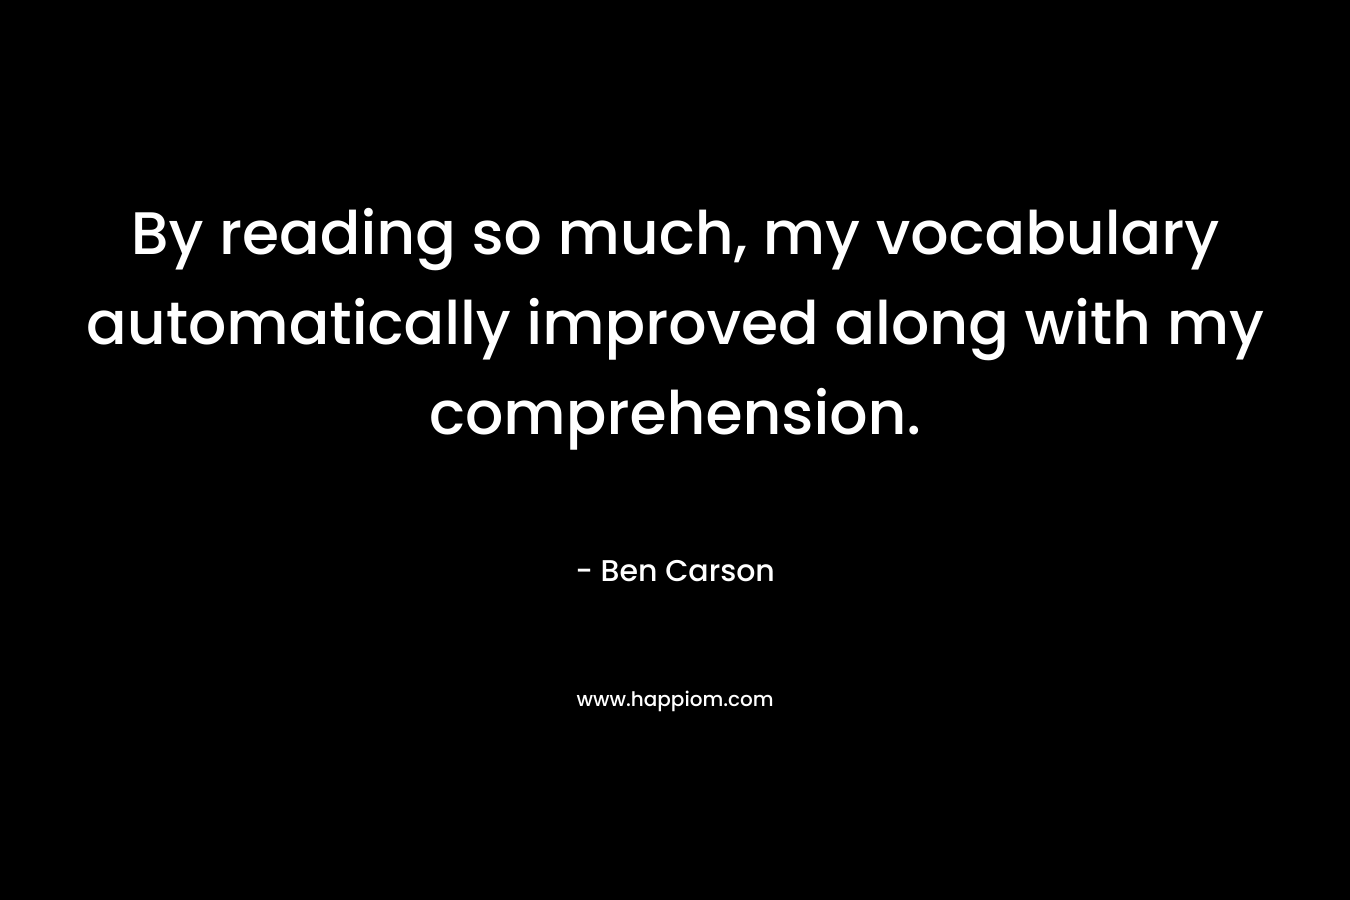 By reading so much, my vocabulary automatically improved along with my comprehension. – Ben Carson